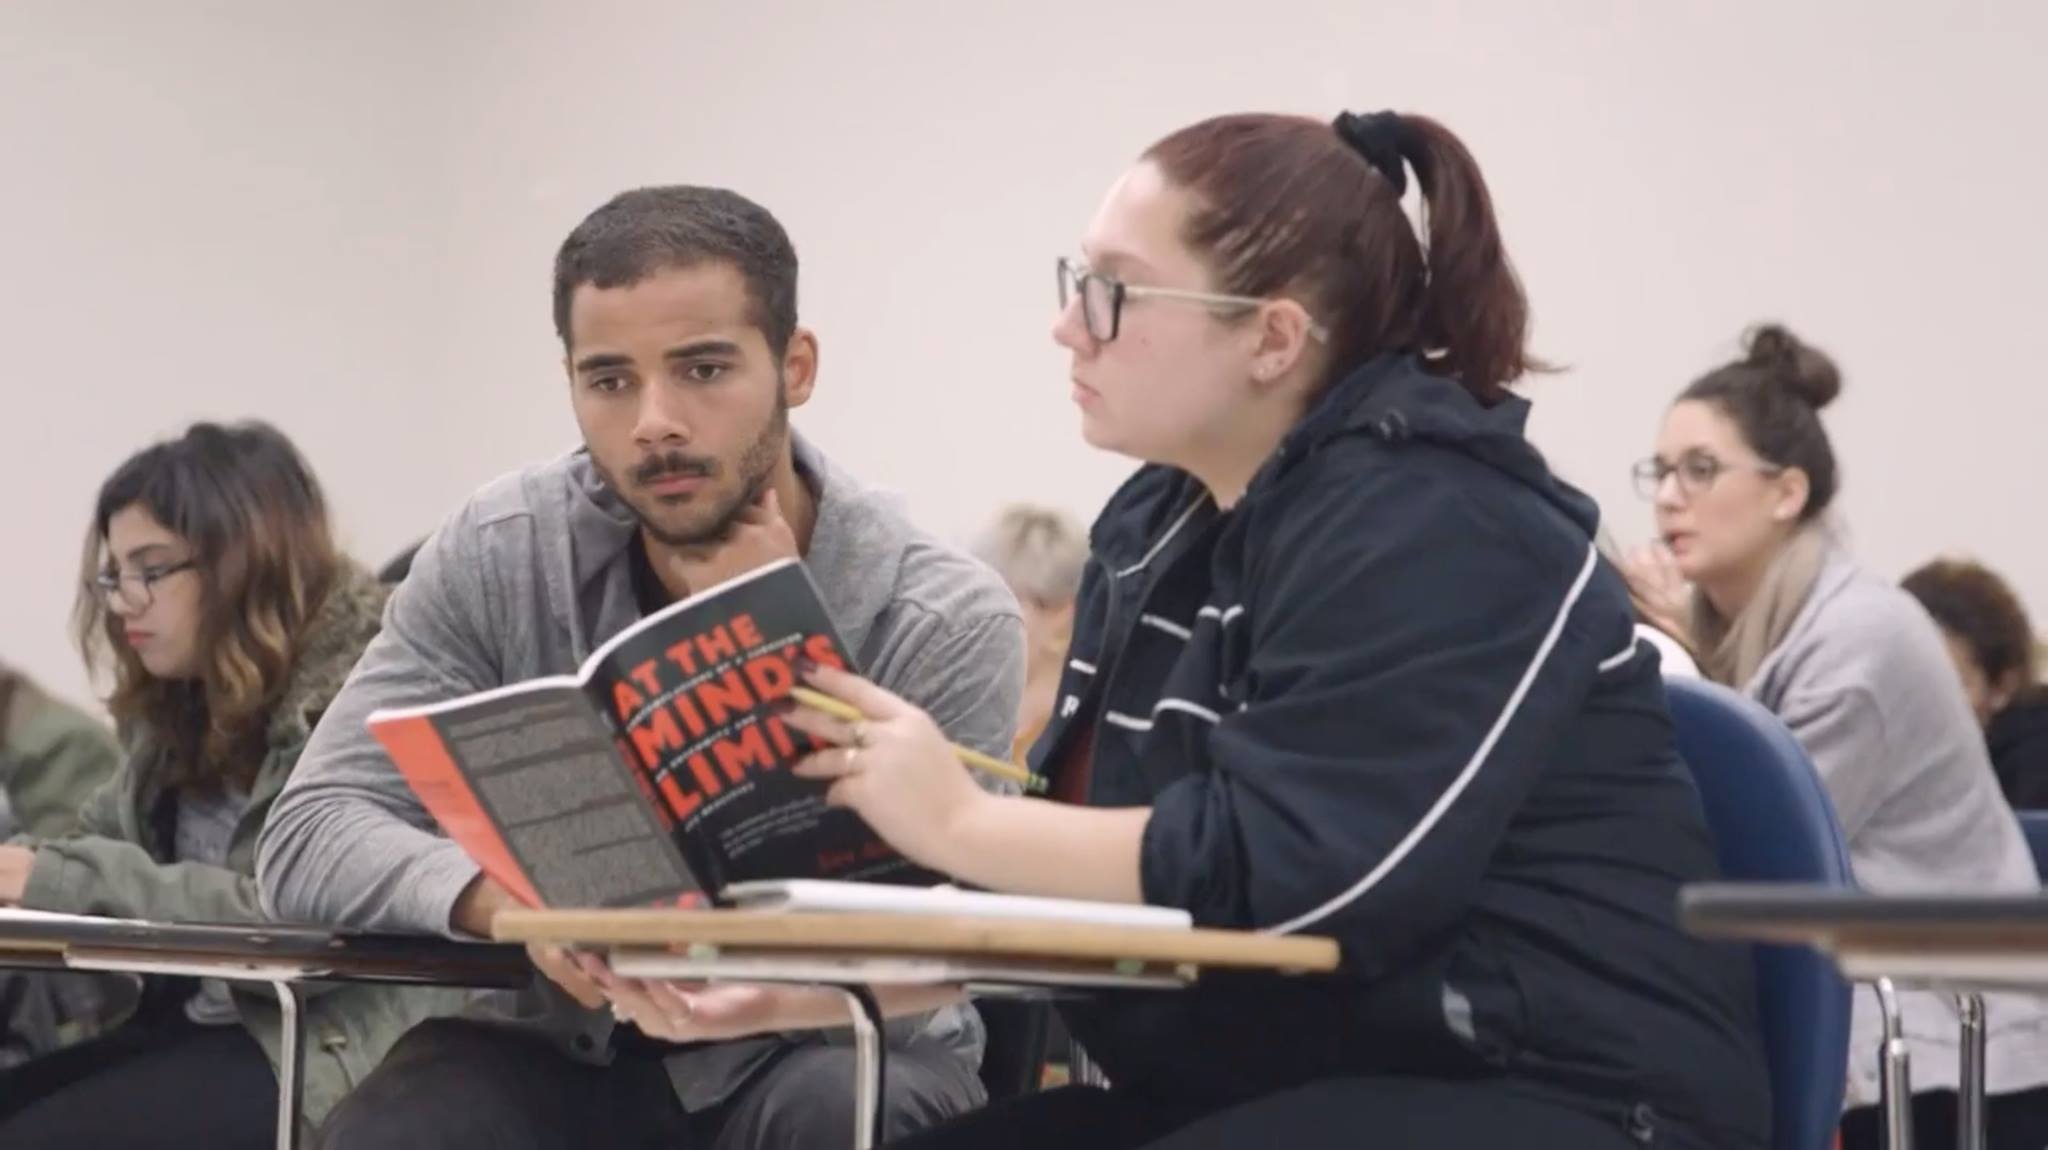 Jewish Studies students in a classroom reading a book from their desks